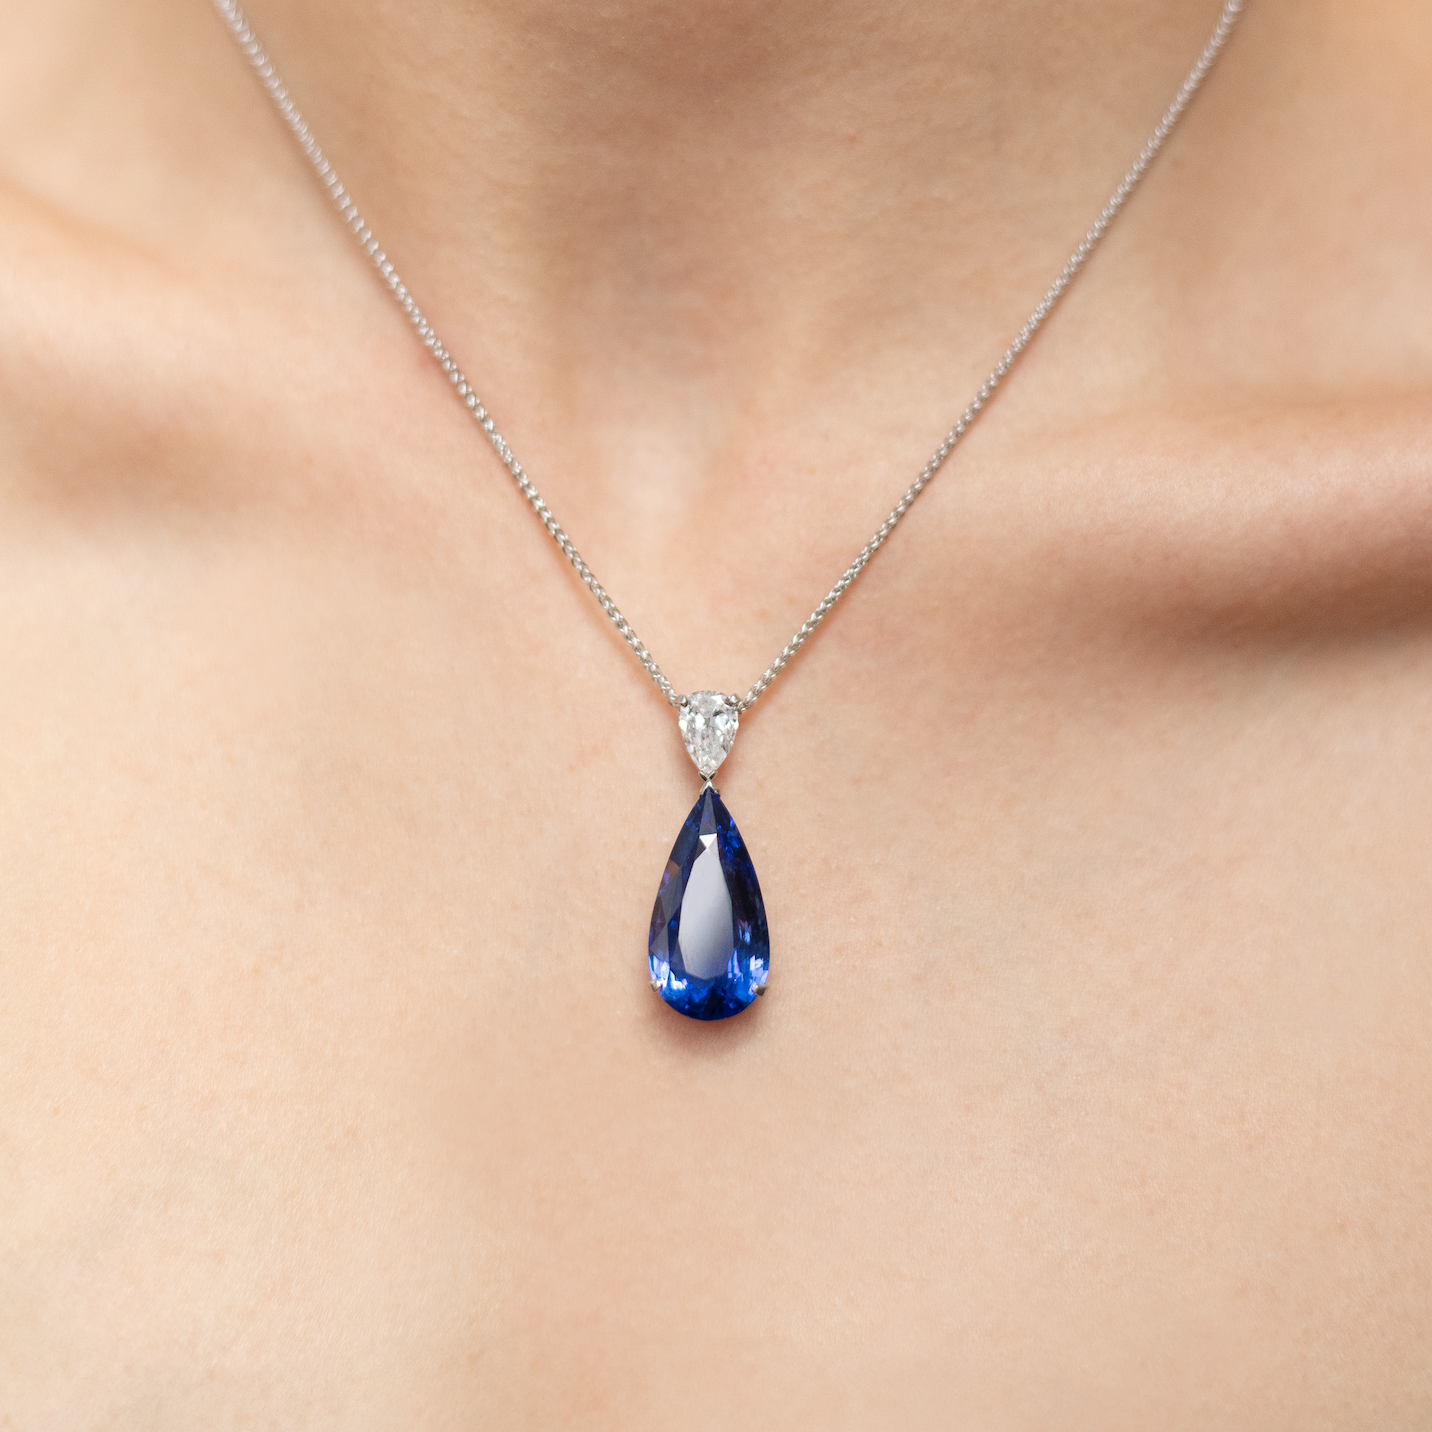 11.93ct Sapphire and Diamond pear on pear pendant